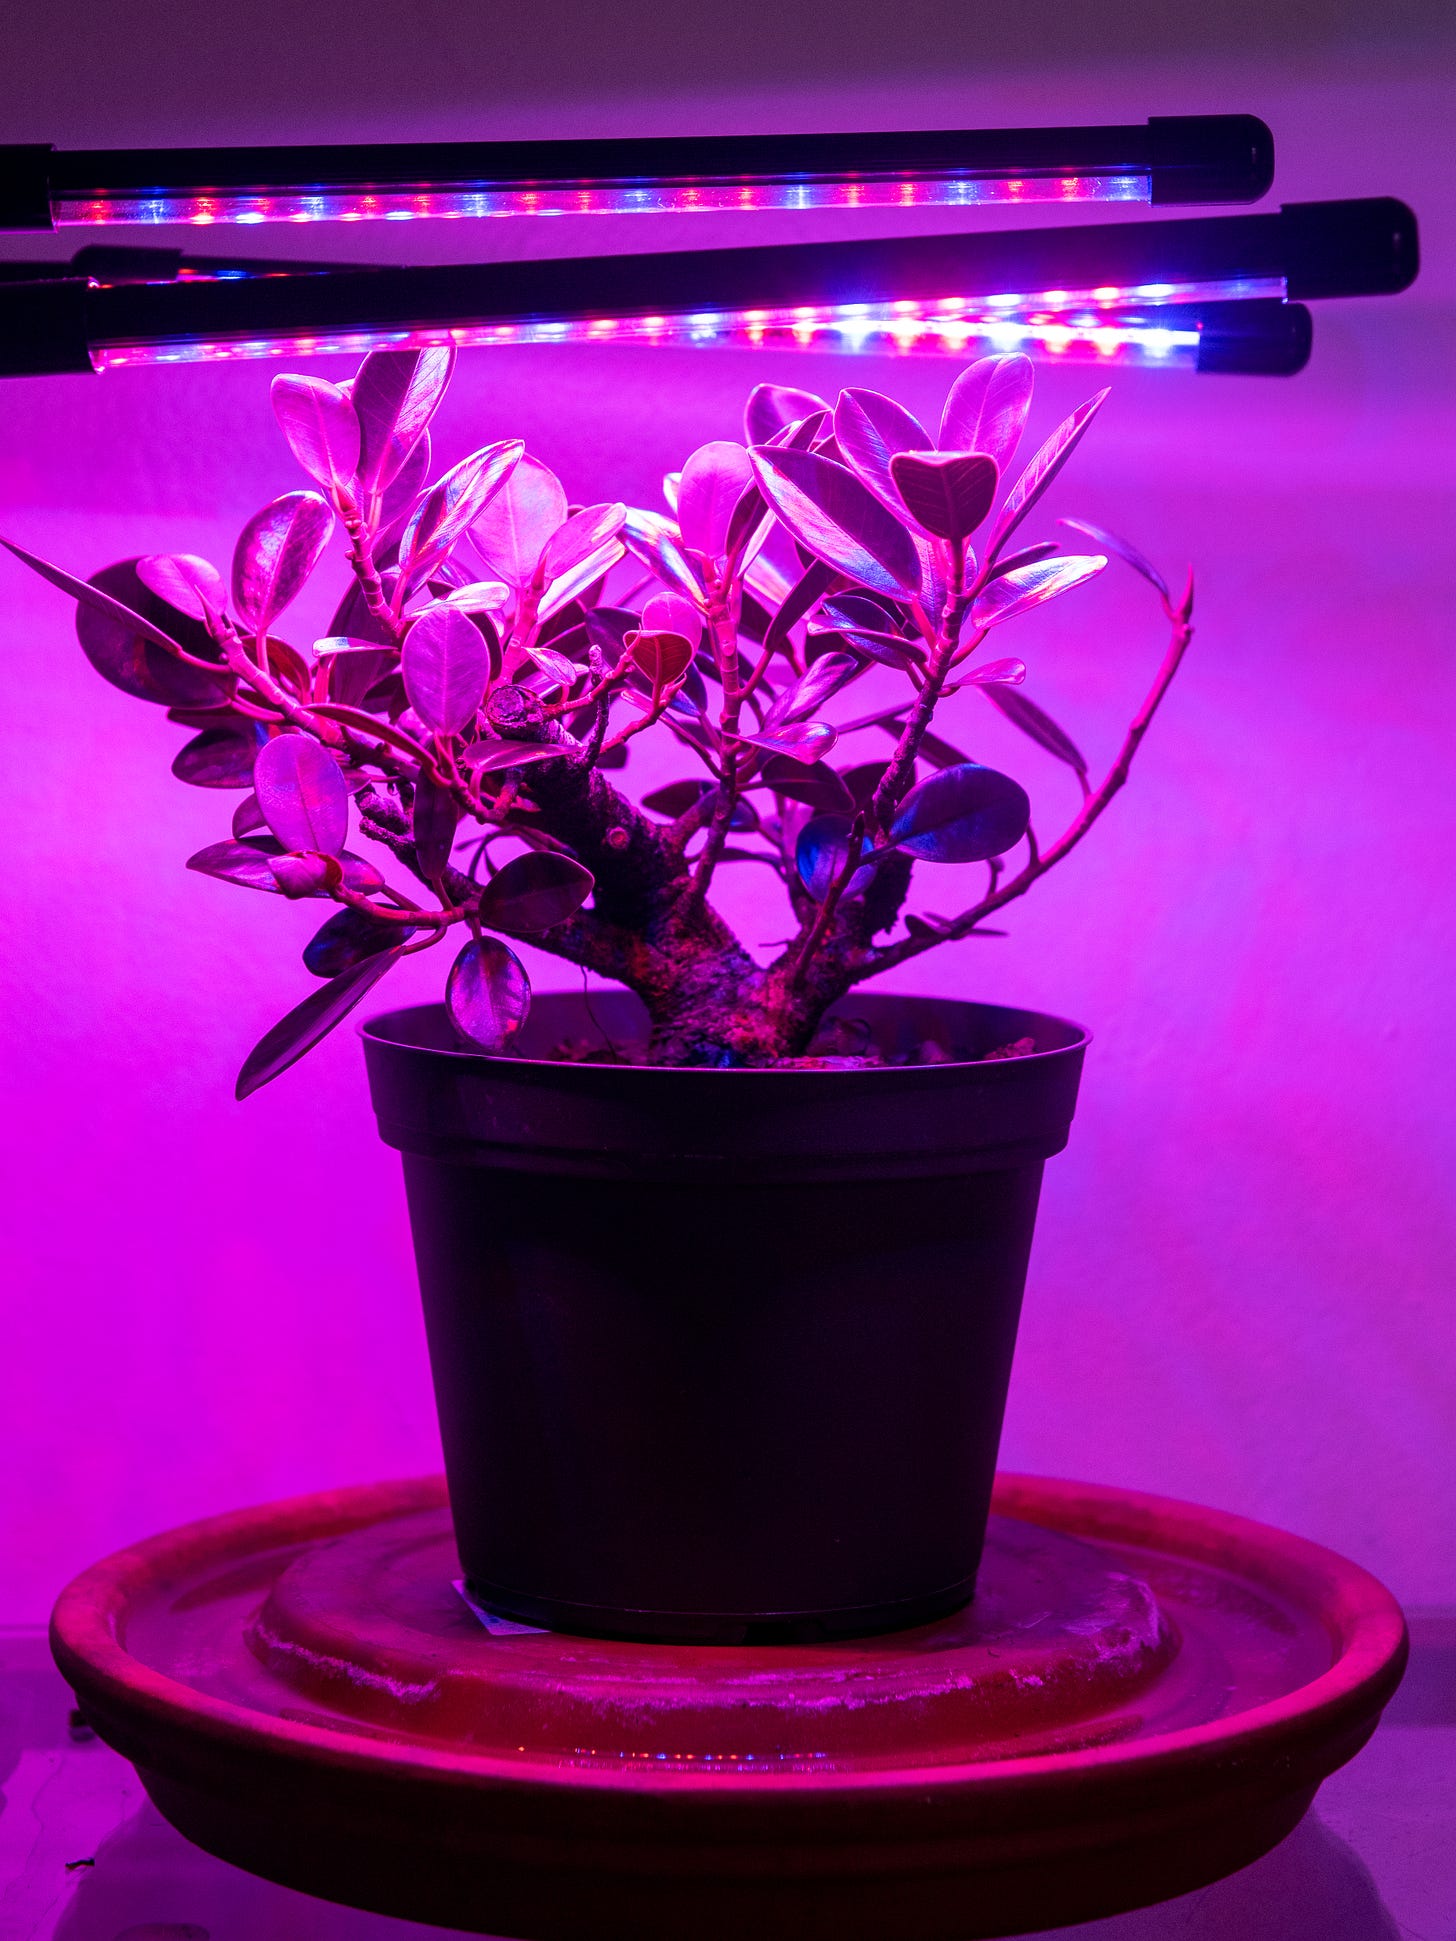 Image description: Photo of a ficus tree under grow lights on a humidity tray. End image description.